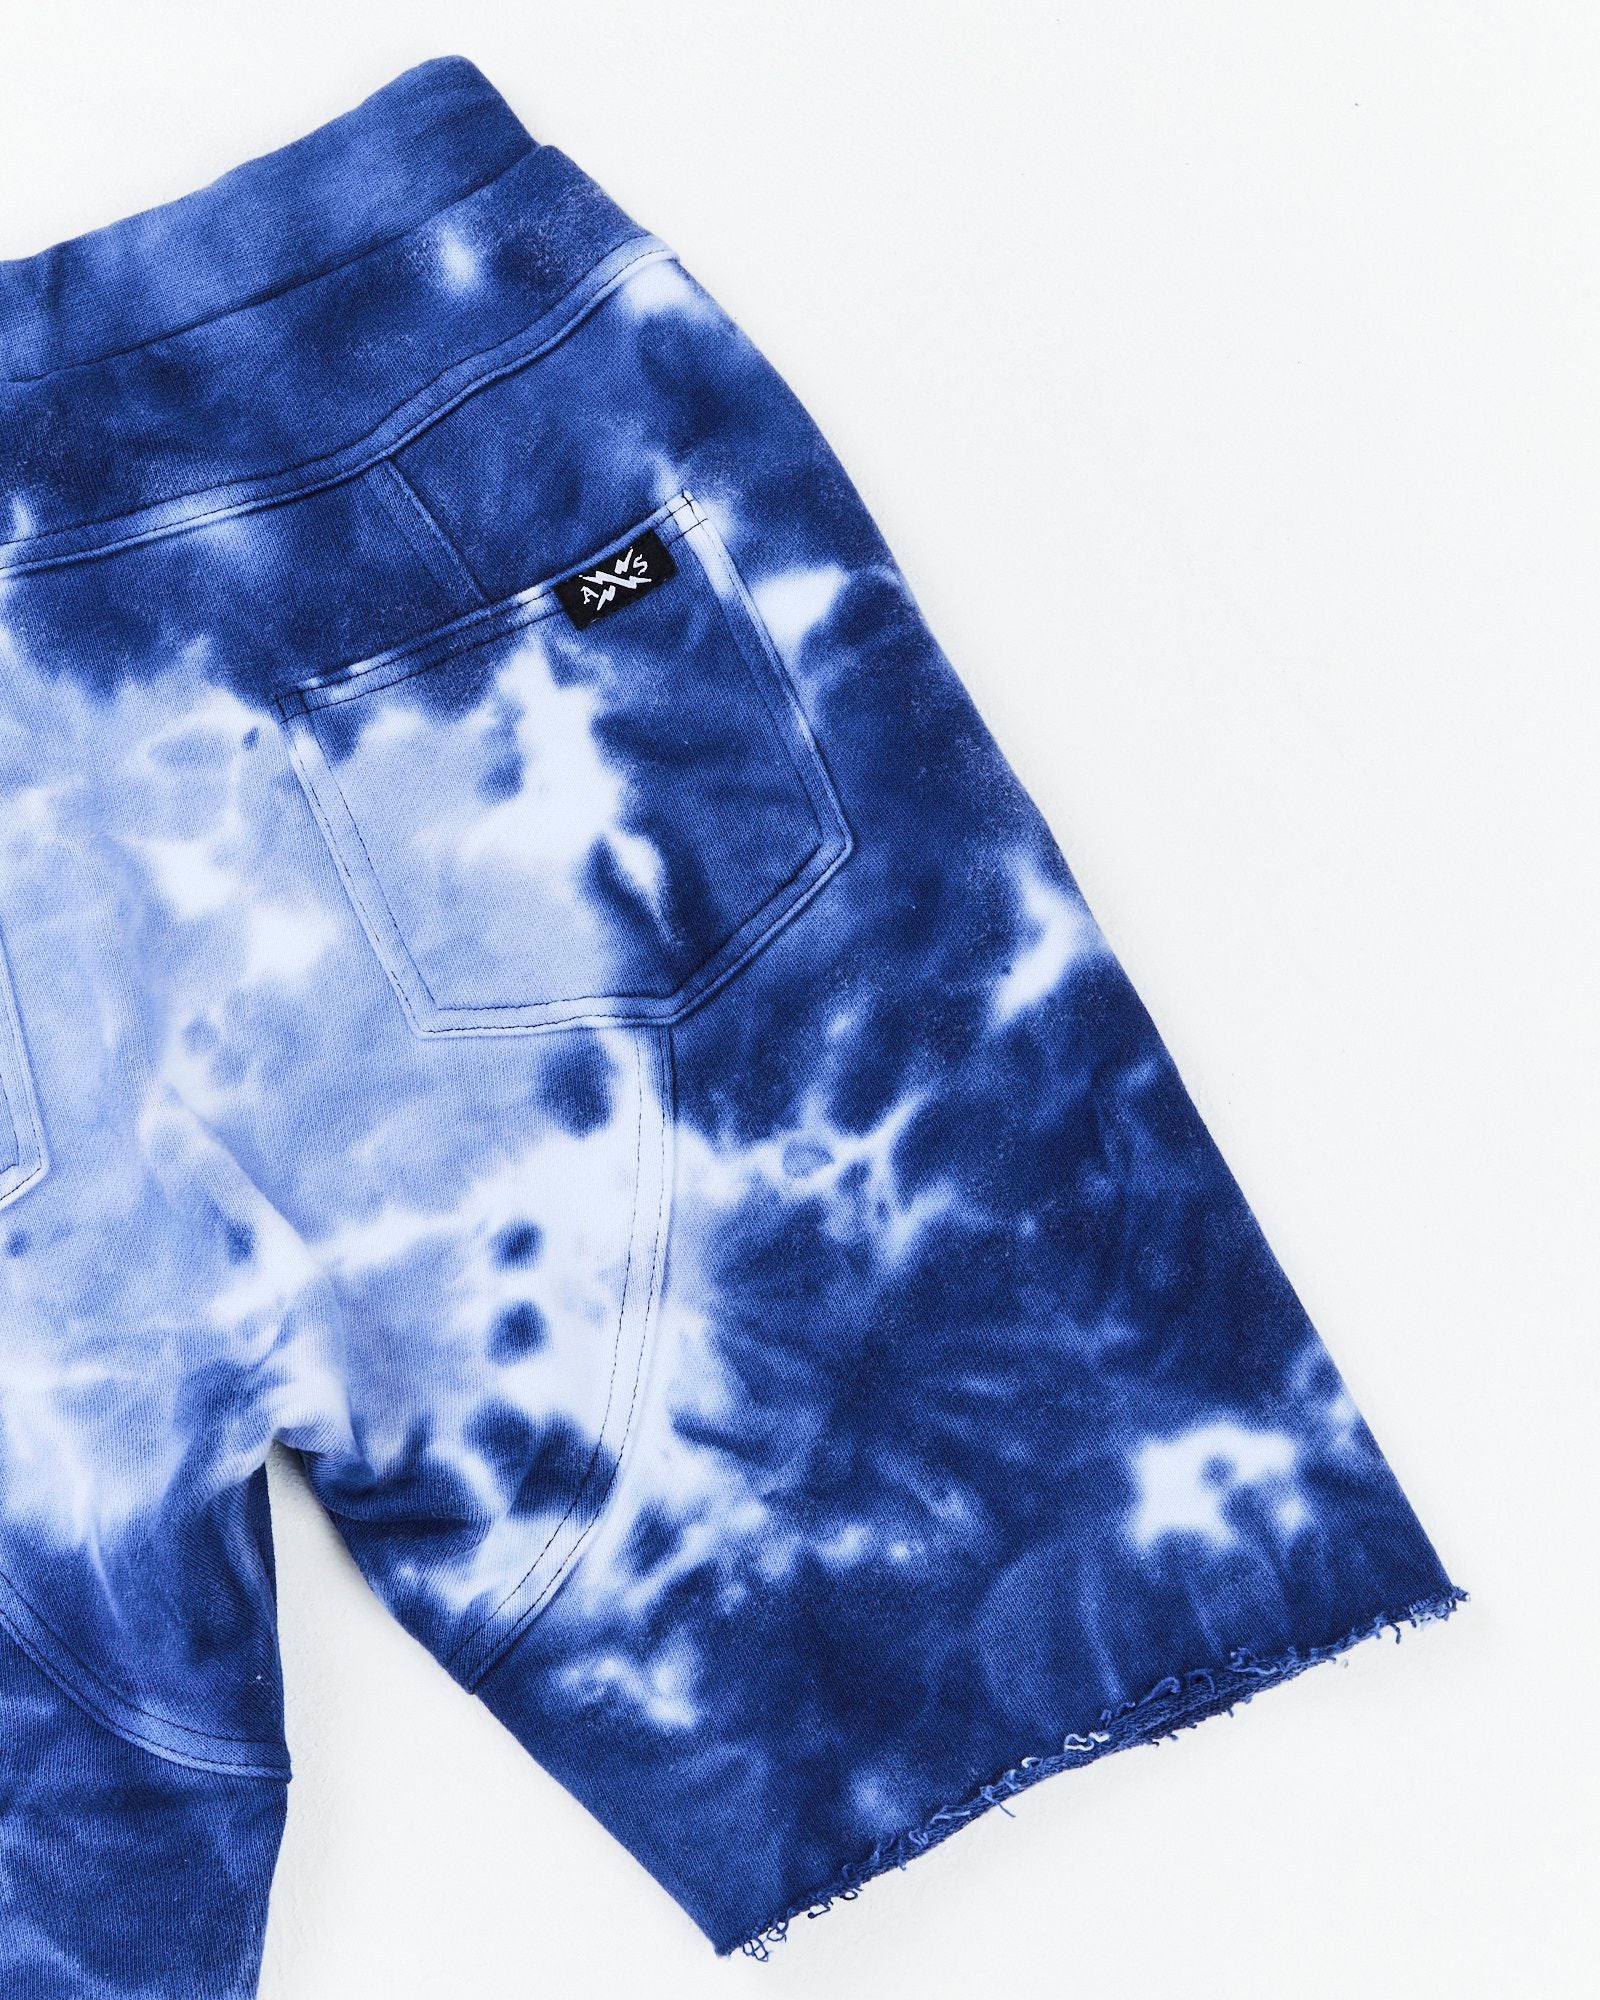 Alphabet Soup's Teen Cloud Surfer Shorts for boys aged 8-19. 100% French Terry fabric and blue cloud marble dye ensures comfort and style. Elasticated waist, adjustable drawcord, faux fly and raw hem. Back panel detail and embroidery on front pocket.